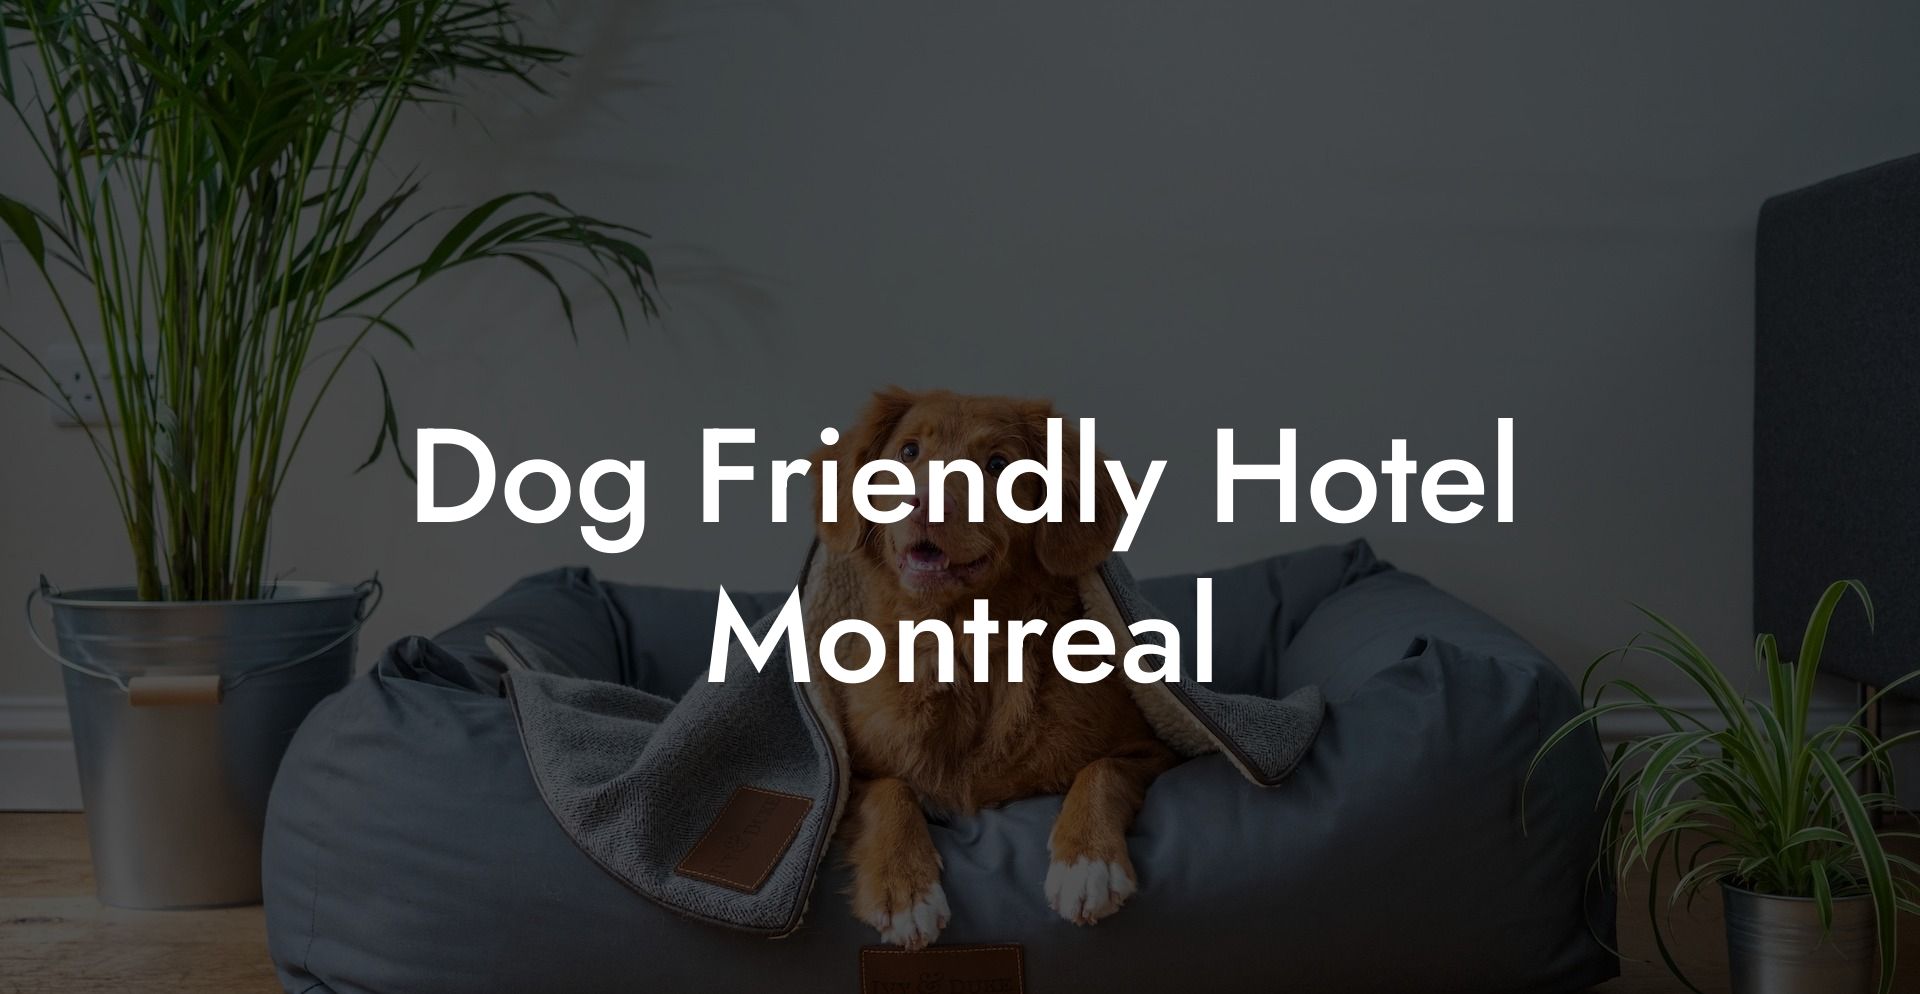 Dog Friendly Hotel Montreal